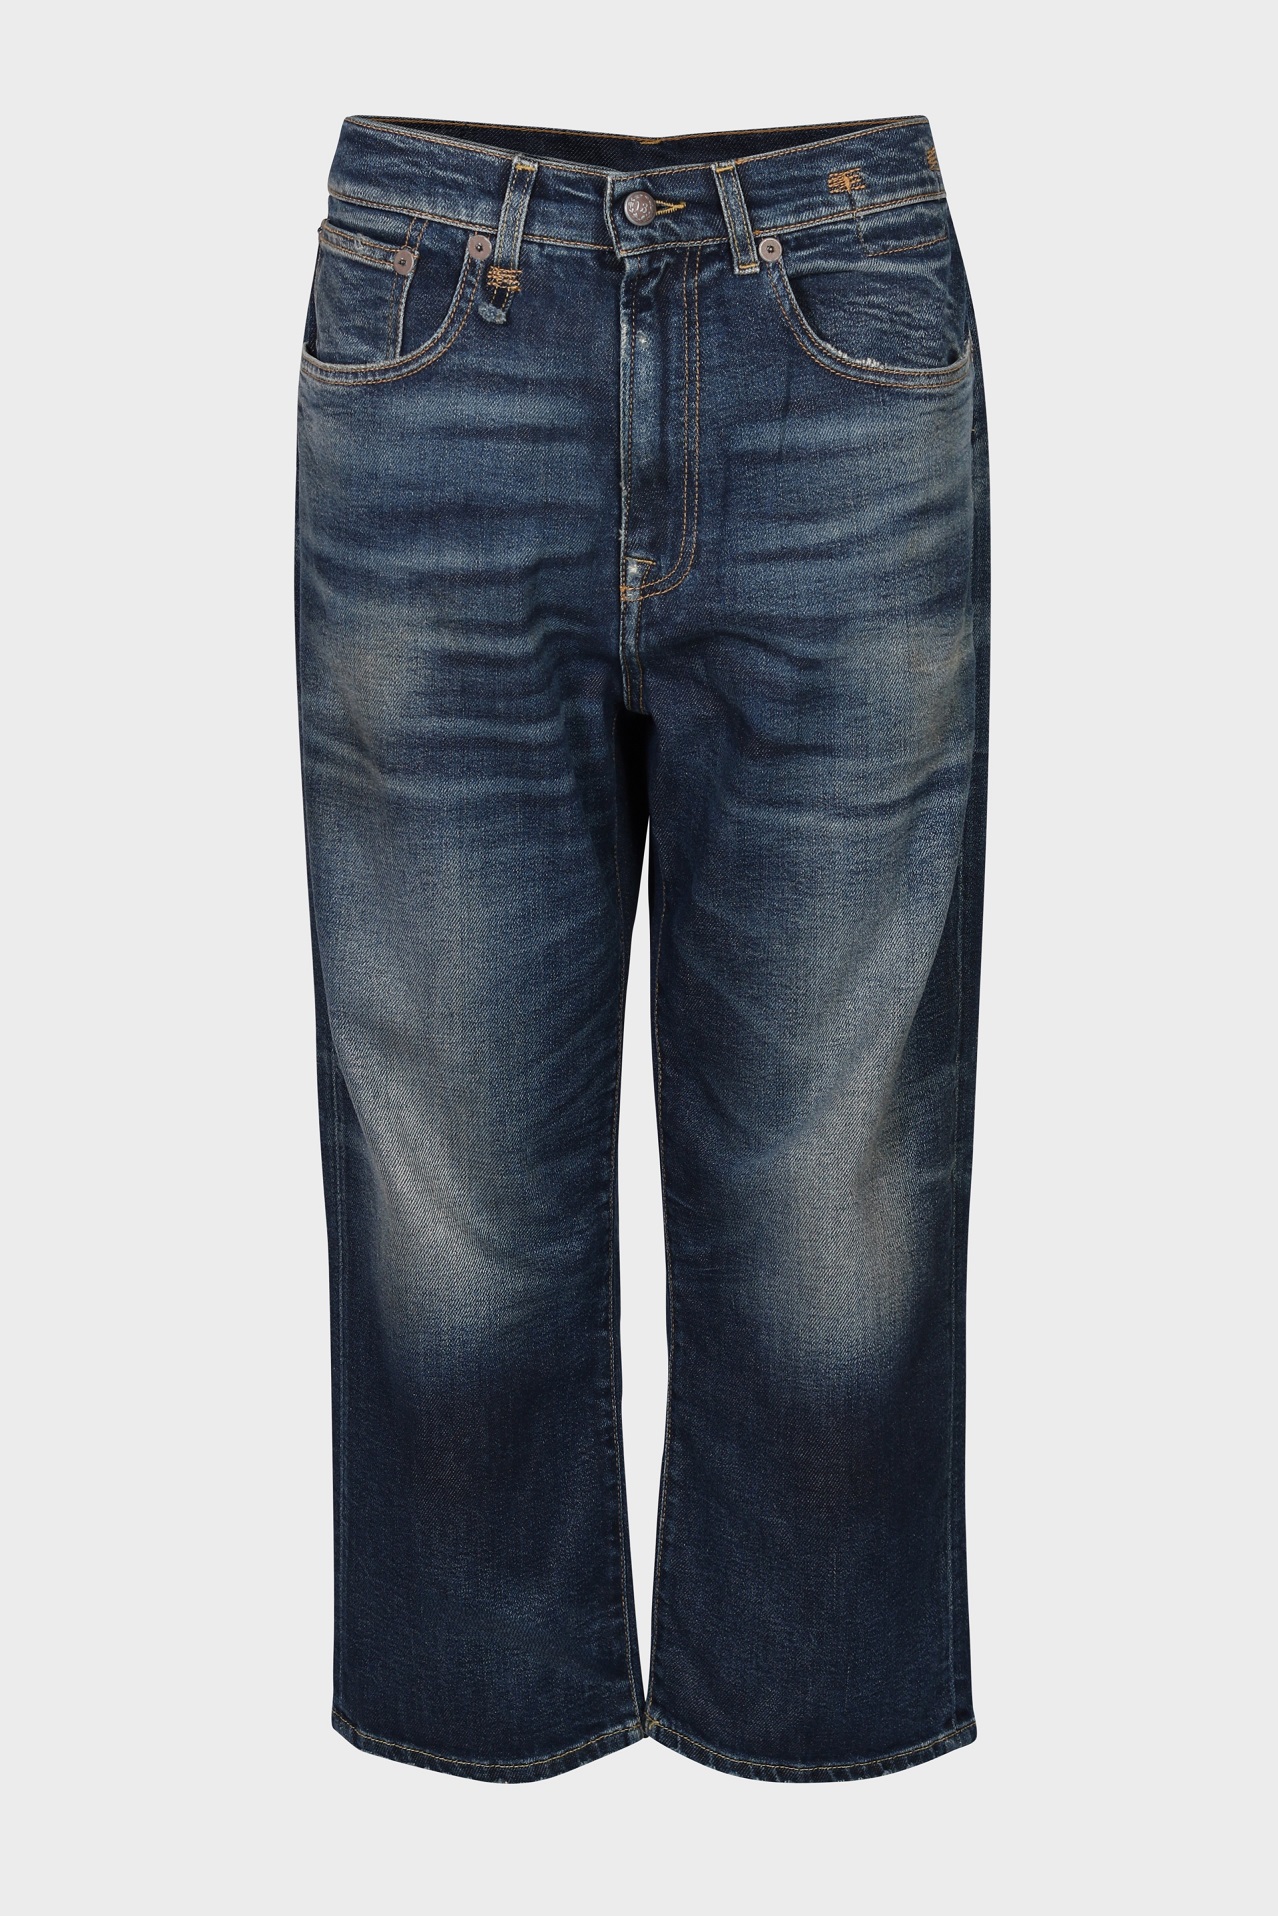 R13 X-BF Jeans in Ansel Blue